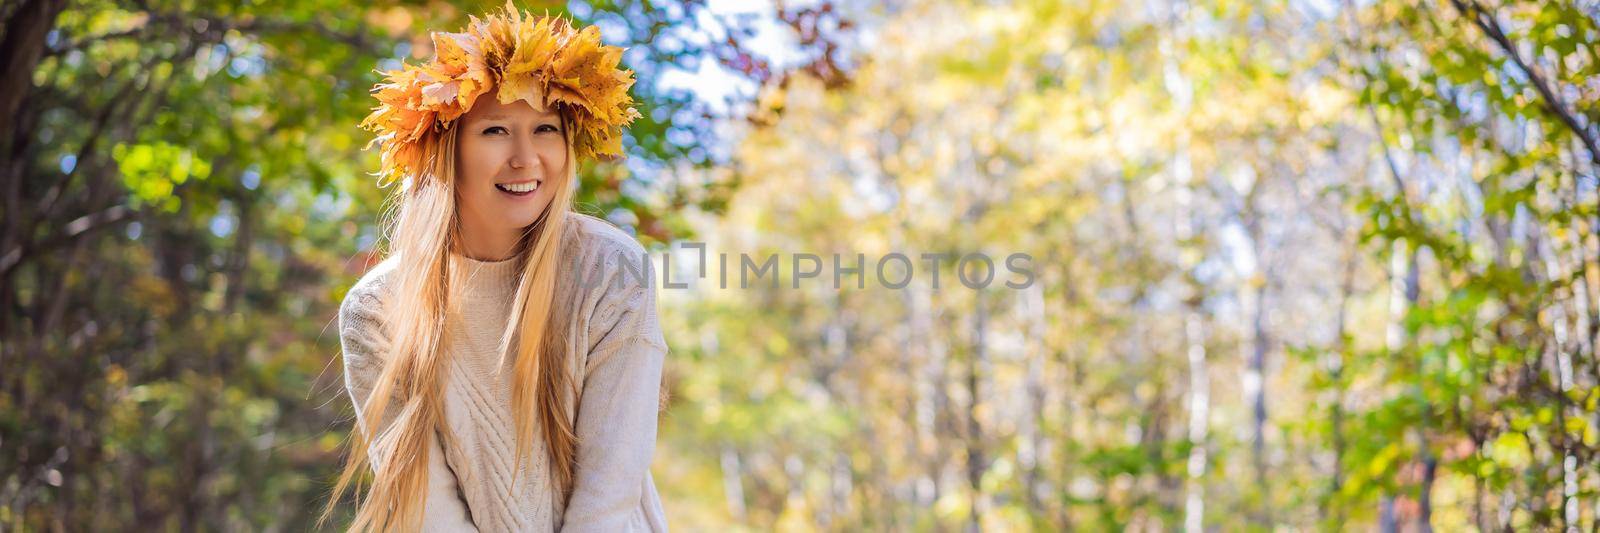 Outdoors lifestyle close up portrait of charming blonde young woman wearing a wreath of autumn leaves. Smiling, walking on the autumn park. Wearing stylish knitted pullover. Wreath of maple leaves. BANNER, LONG FORMAT